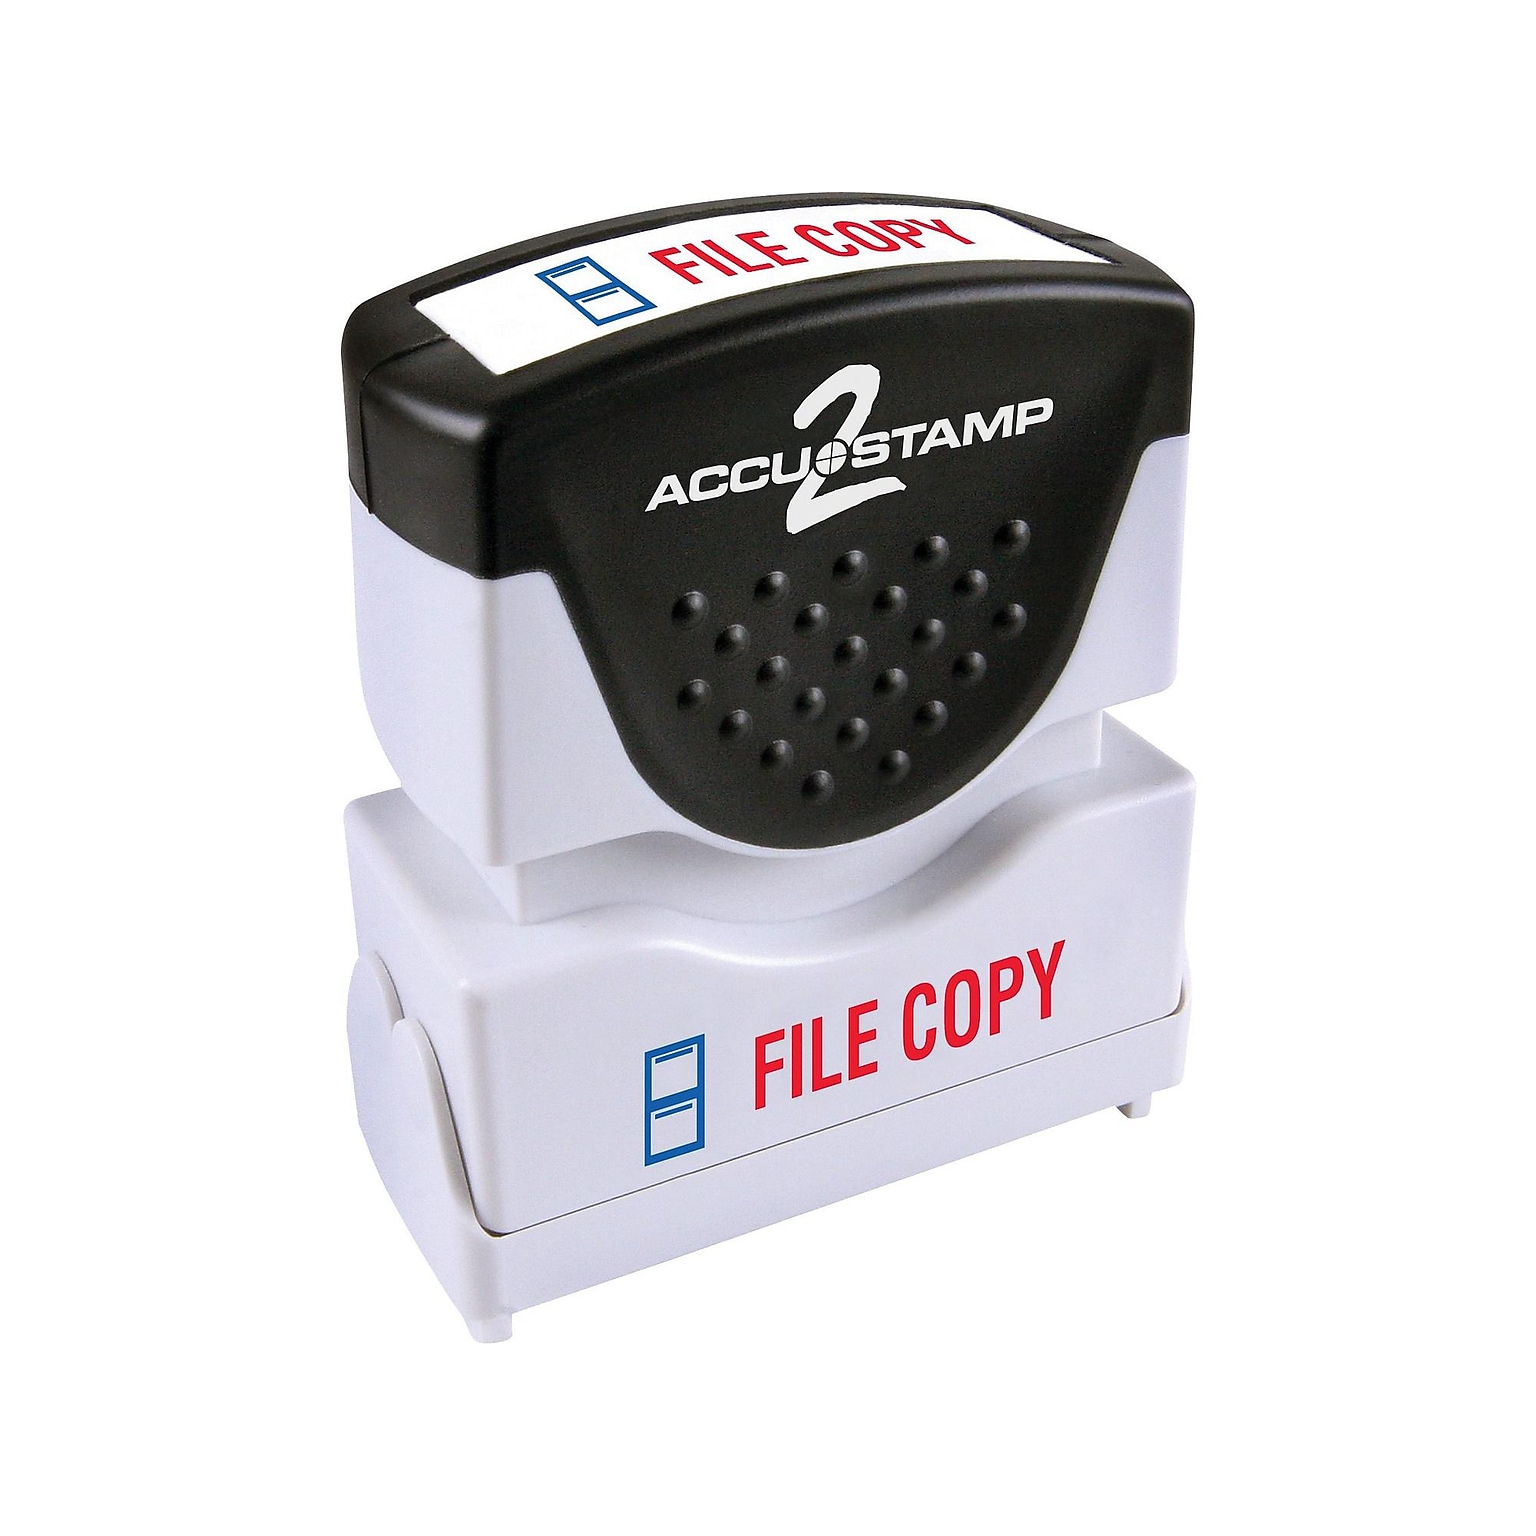 Accu-Stamp 2 Pre-Inked Stamp, FILE COPY, Blue and Red Inks (035524)